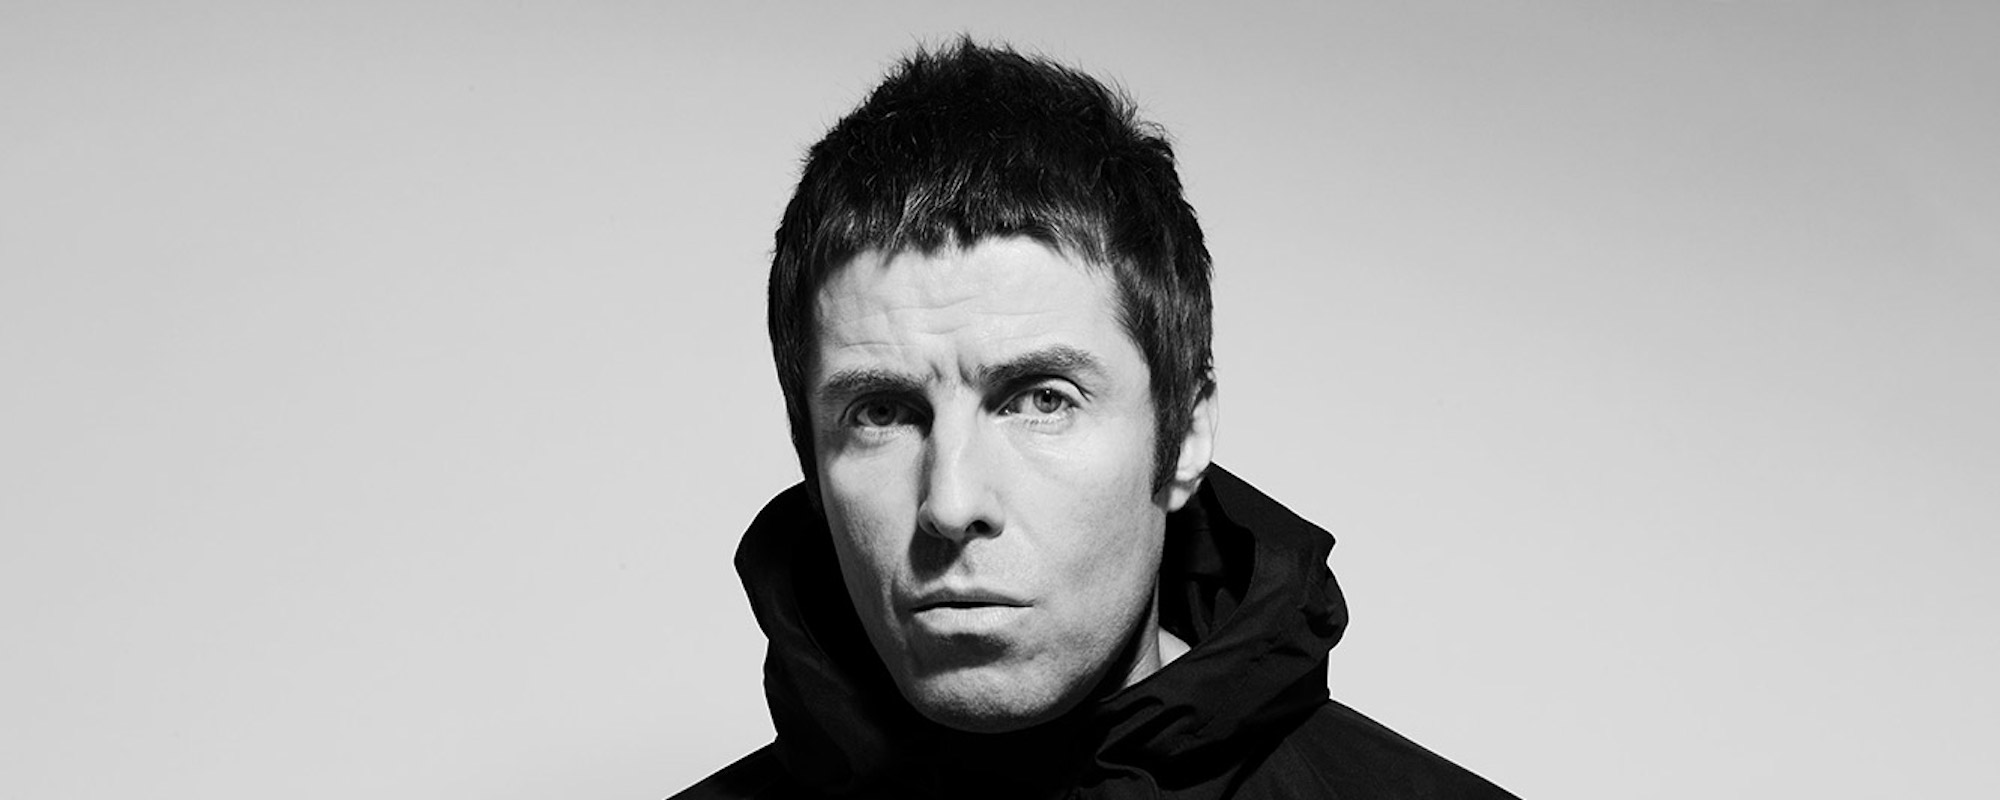 Liam Gallagher Brings Attention to Mental Health in “Too Good For Giving Up” Video